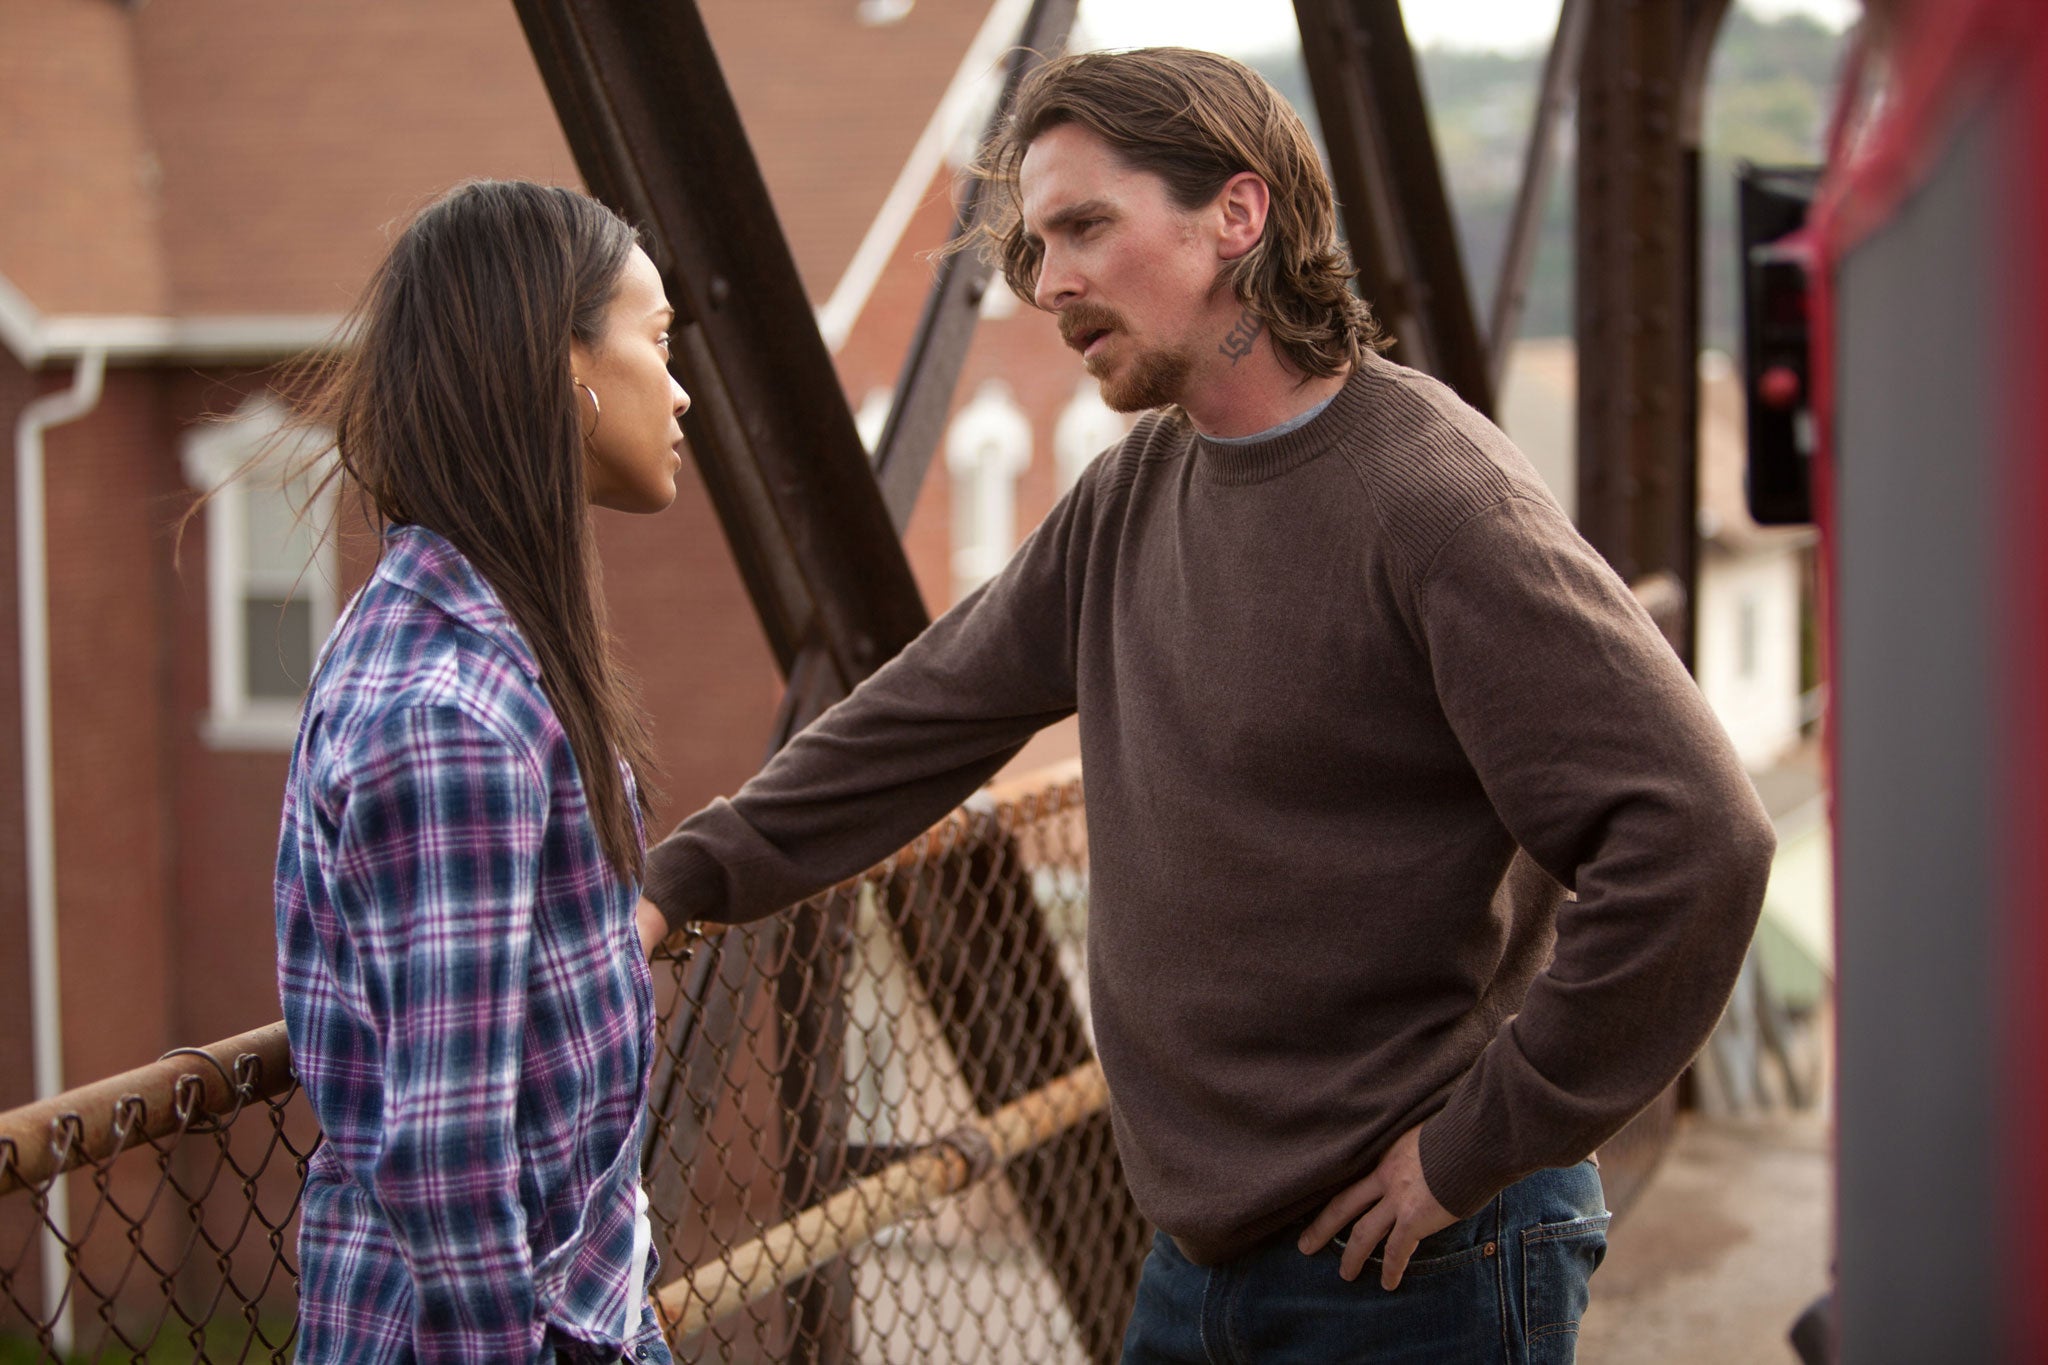 Christian Bale and Zoe Saldana in 'Out Of The Furnace'